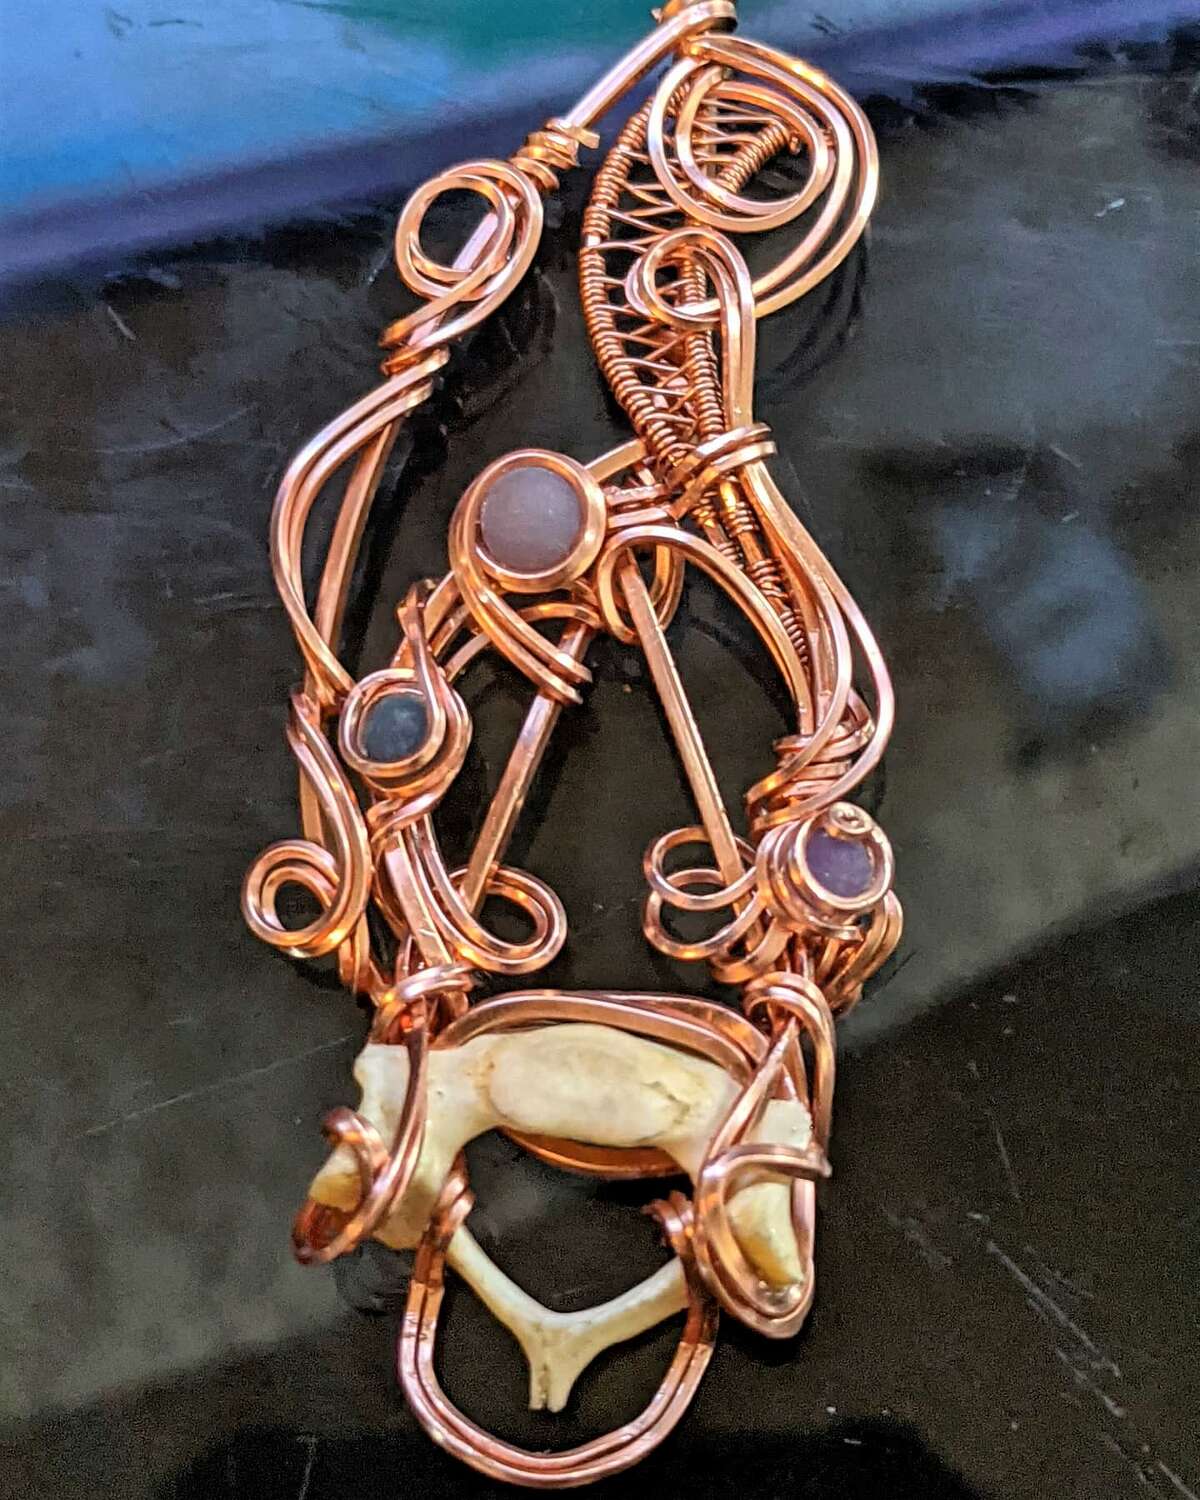 A hand-wire-wrapped pendant by Glamtrashzodiac, founded by CyRen Sohngs in 2015. The Alton-based jewelry maker will be a popup shop at Kooliverse Couture Night 3, at 6 p.m., Thursday, at The Conservatory, 554 E. Broadway, in Alton. 